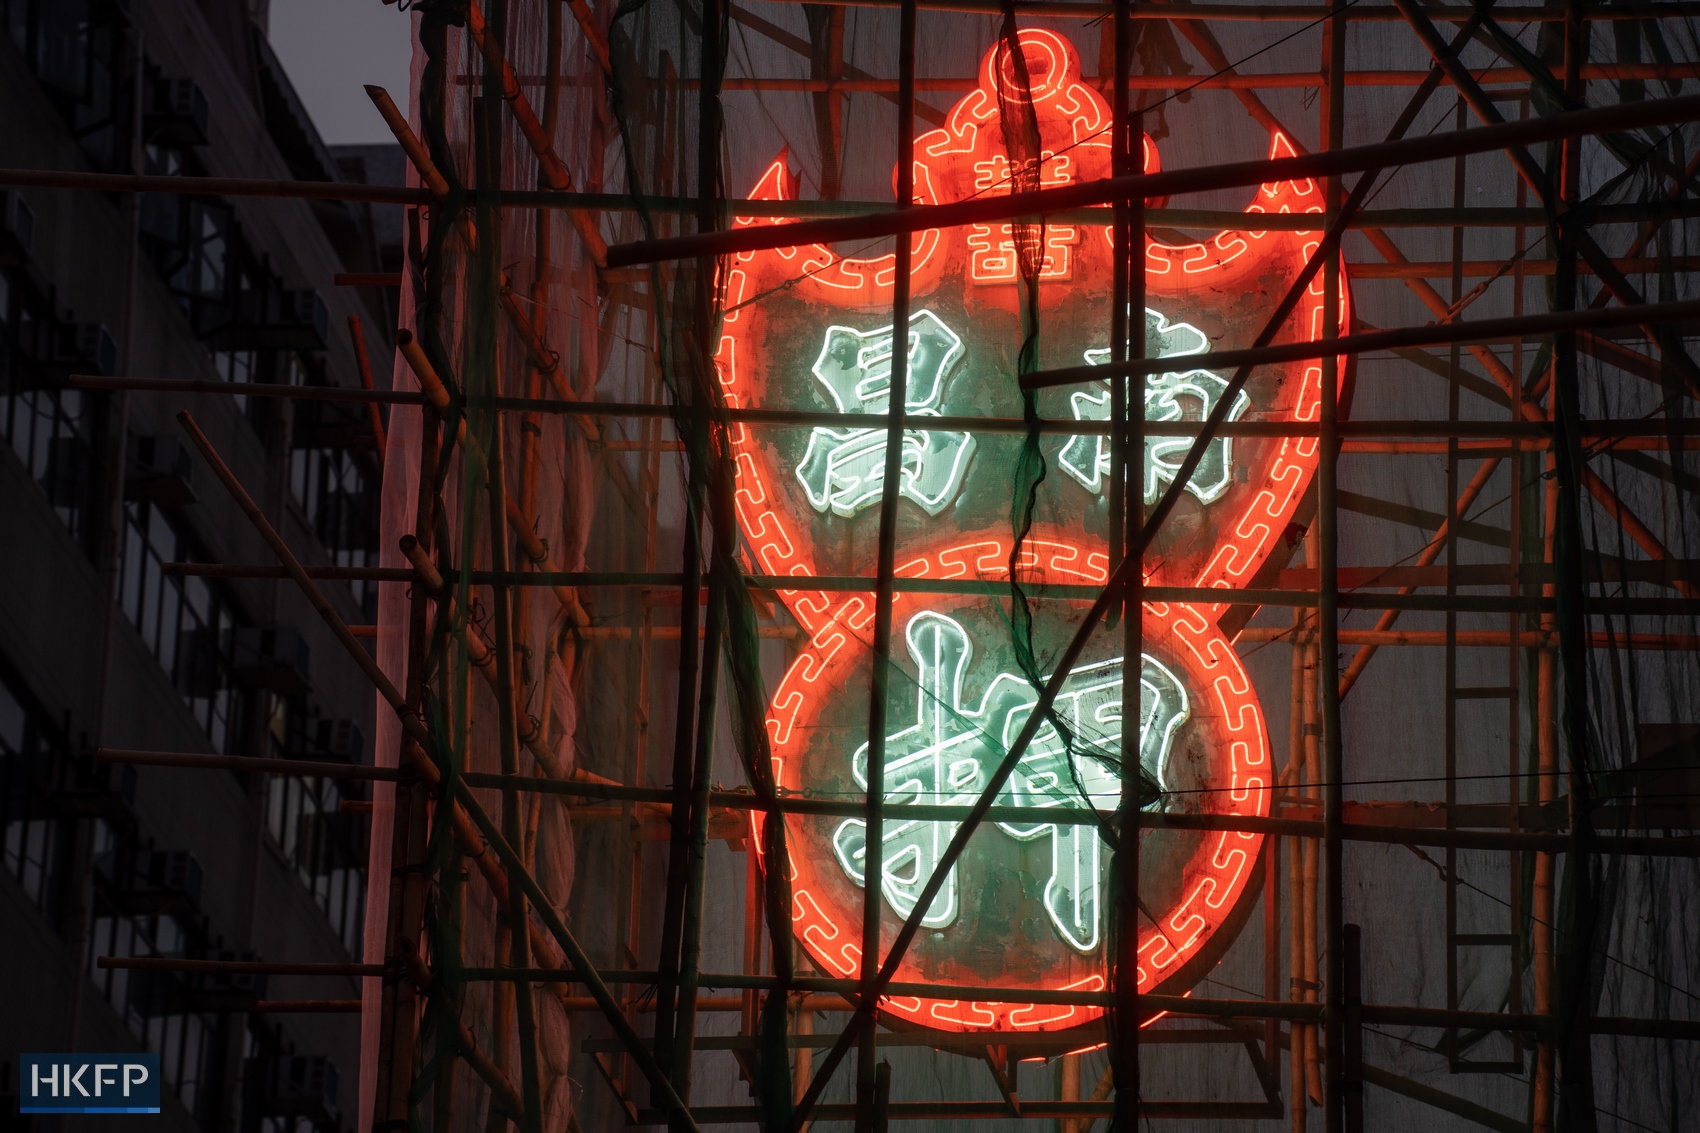 The neon shop sign of Nam Cheong Pawn Shop in Sham Shui Po.